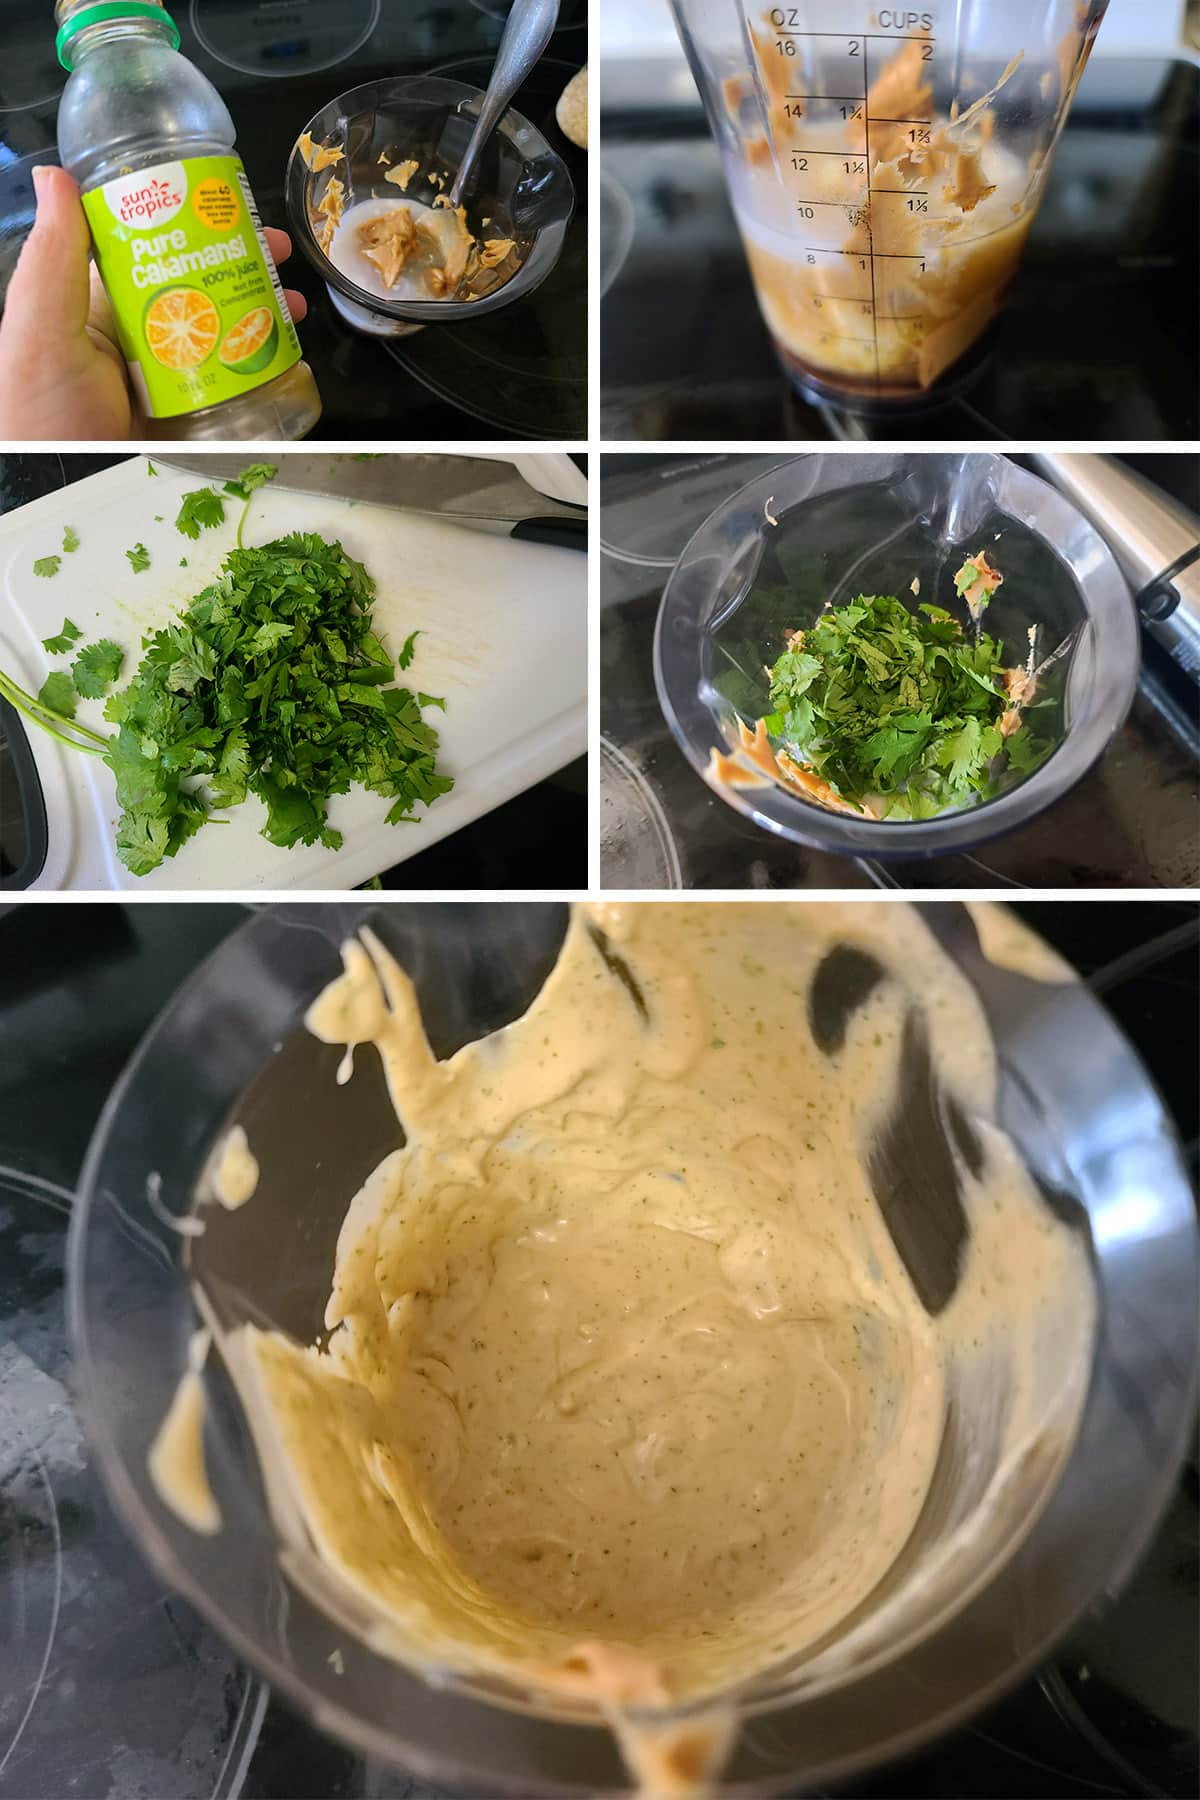 A 5 part image showing the peanut dressing being prepared in a blender cup.